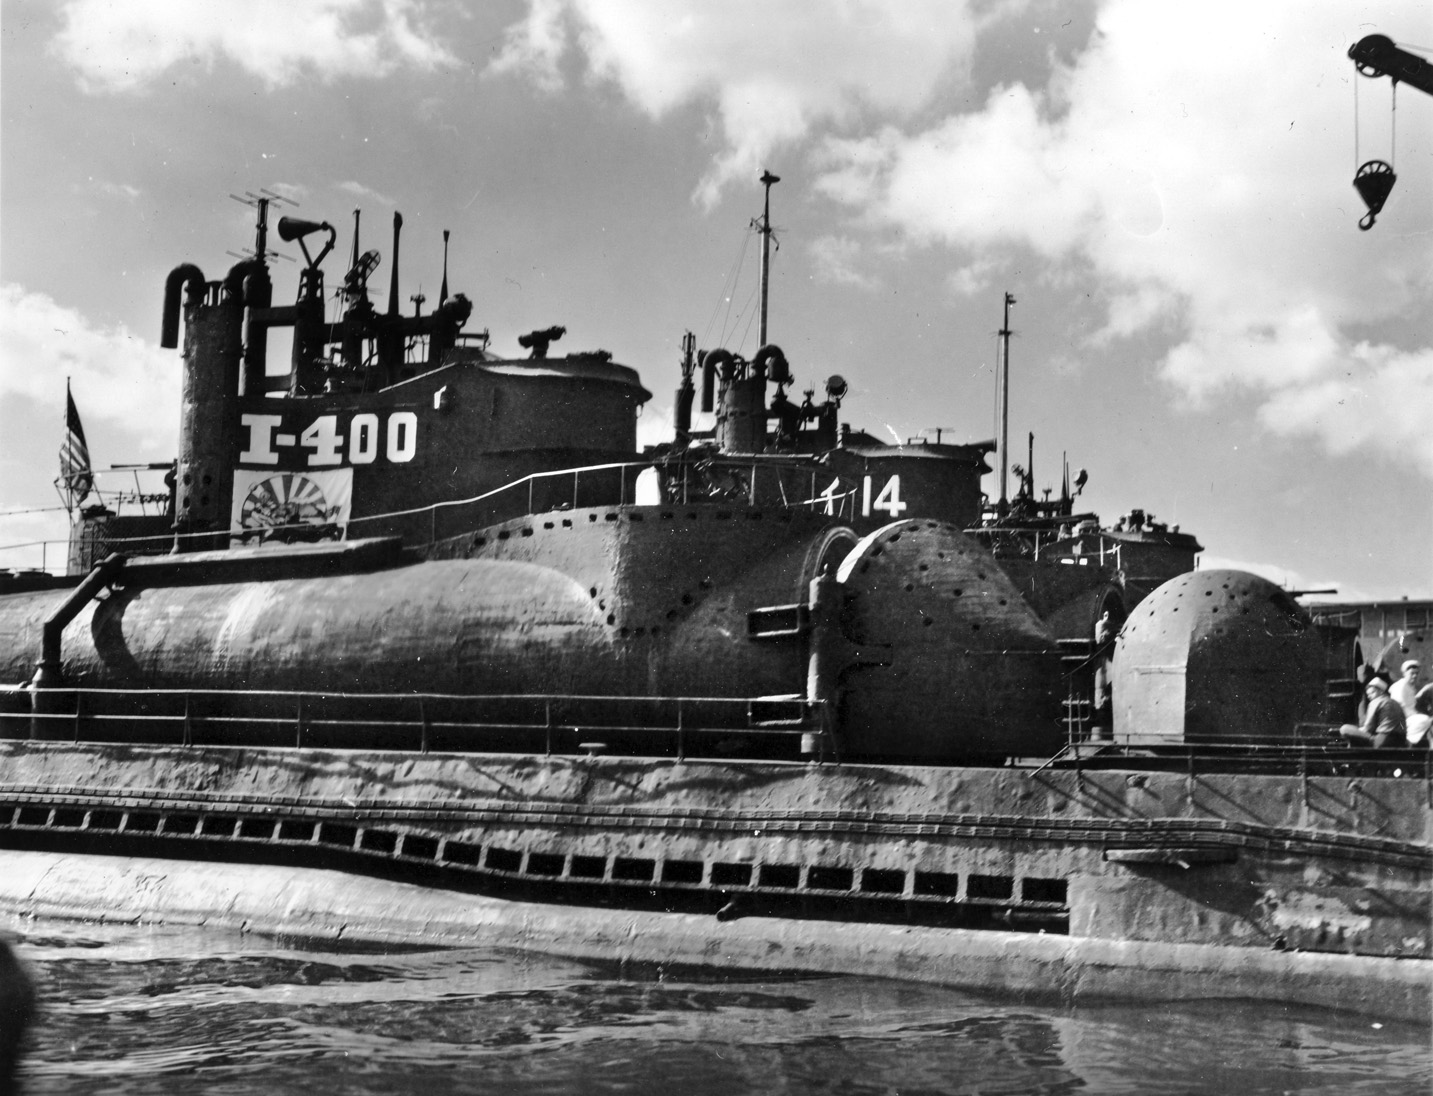 The large Japanese submarine I-400 was surrendered by the Imperial Japanese Navy when World War II ended. Shown here in Hawaiian waters, its substantial hangar is visible. Its original mission to transport bombers to attack the U.S. West Coast never materialized as the fortunes of war turned against Japan. 